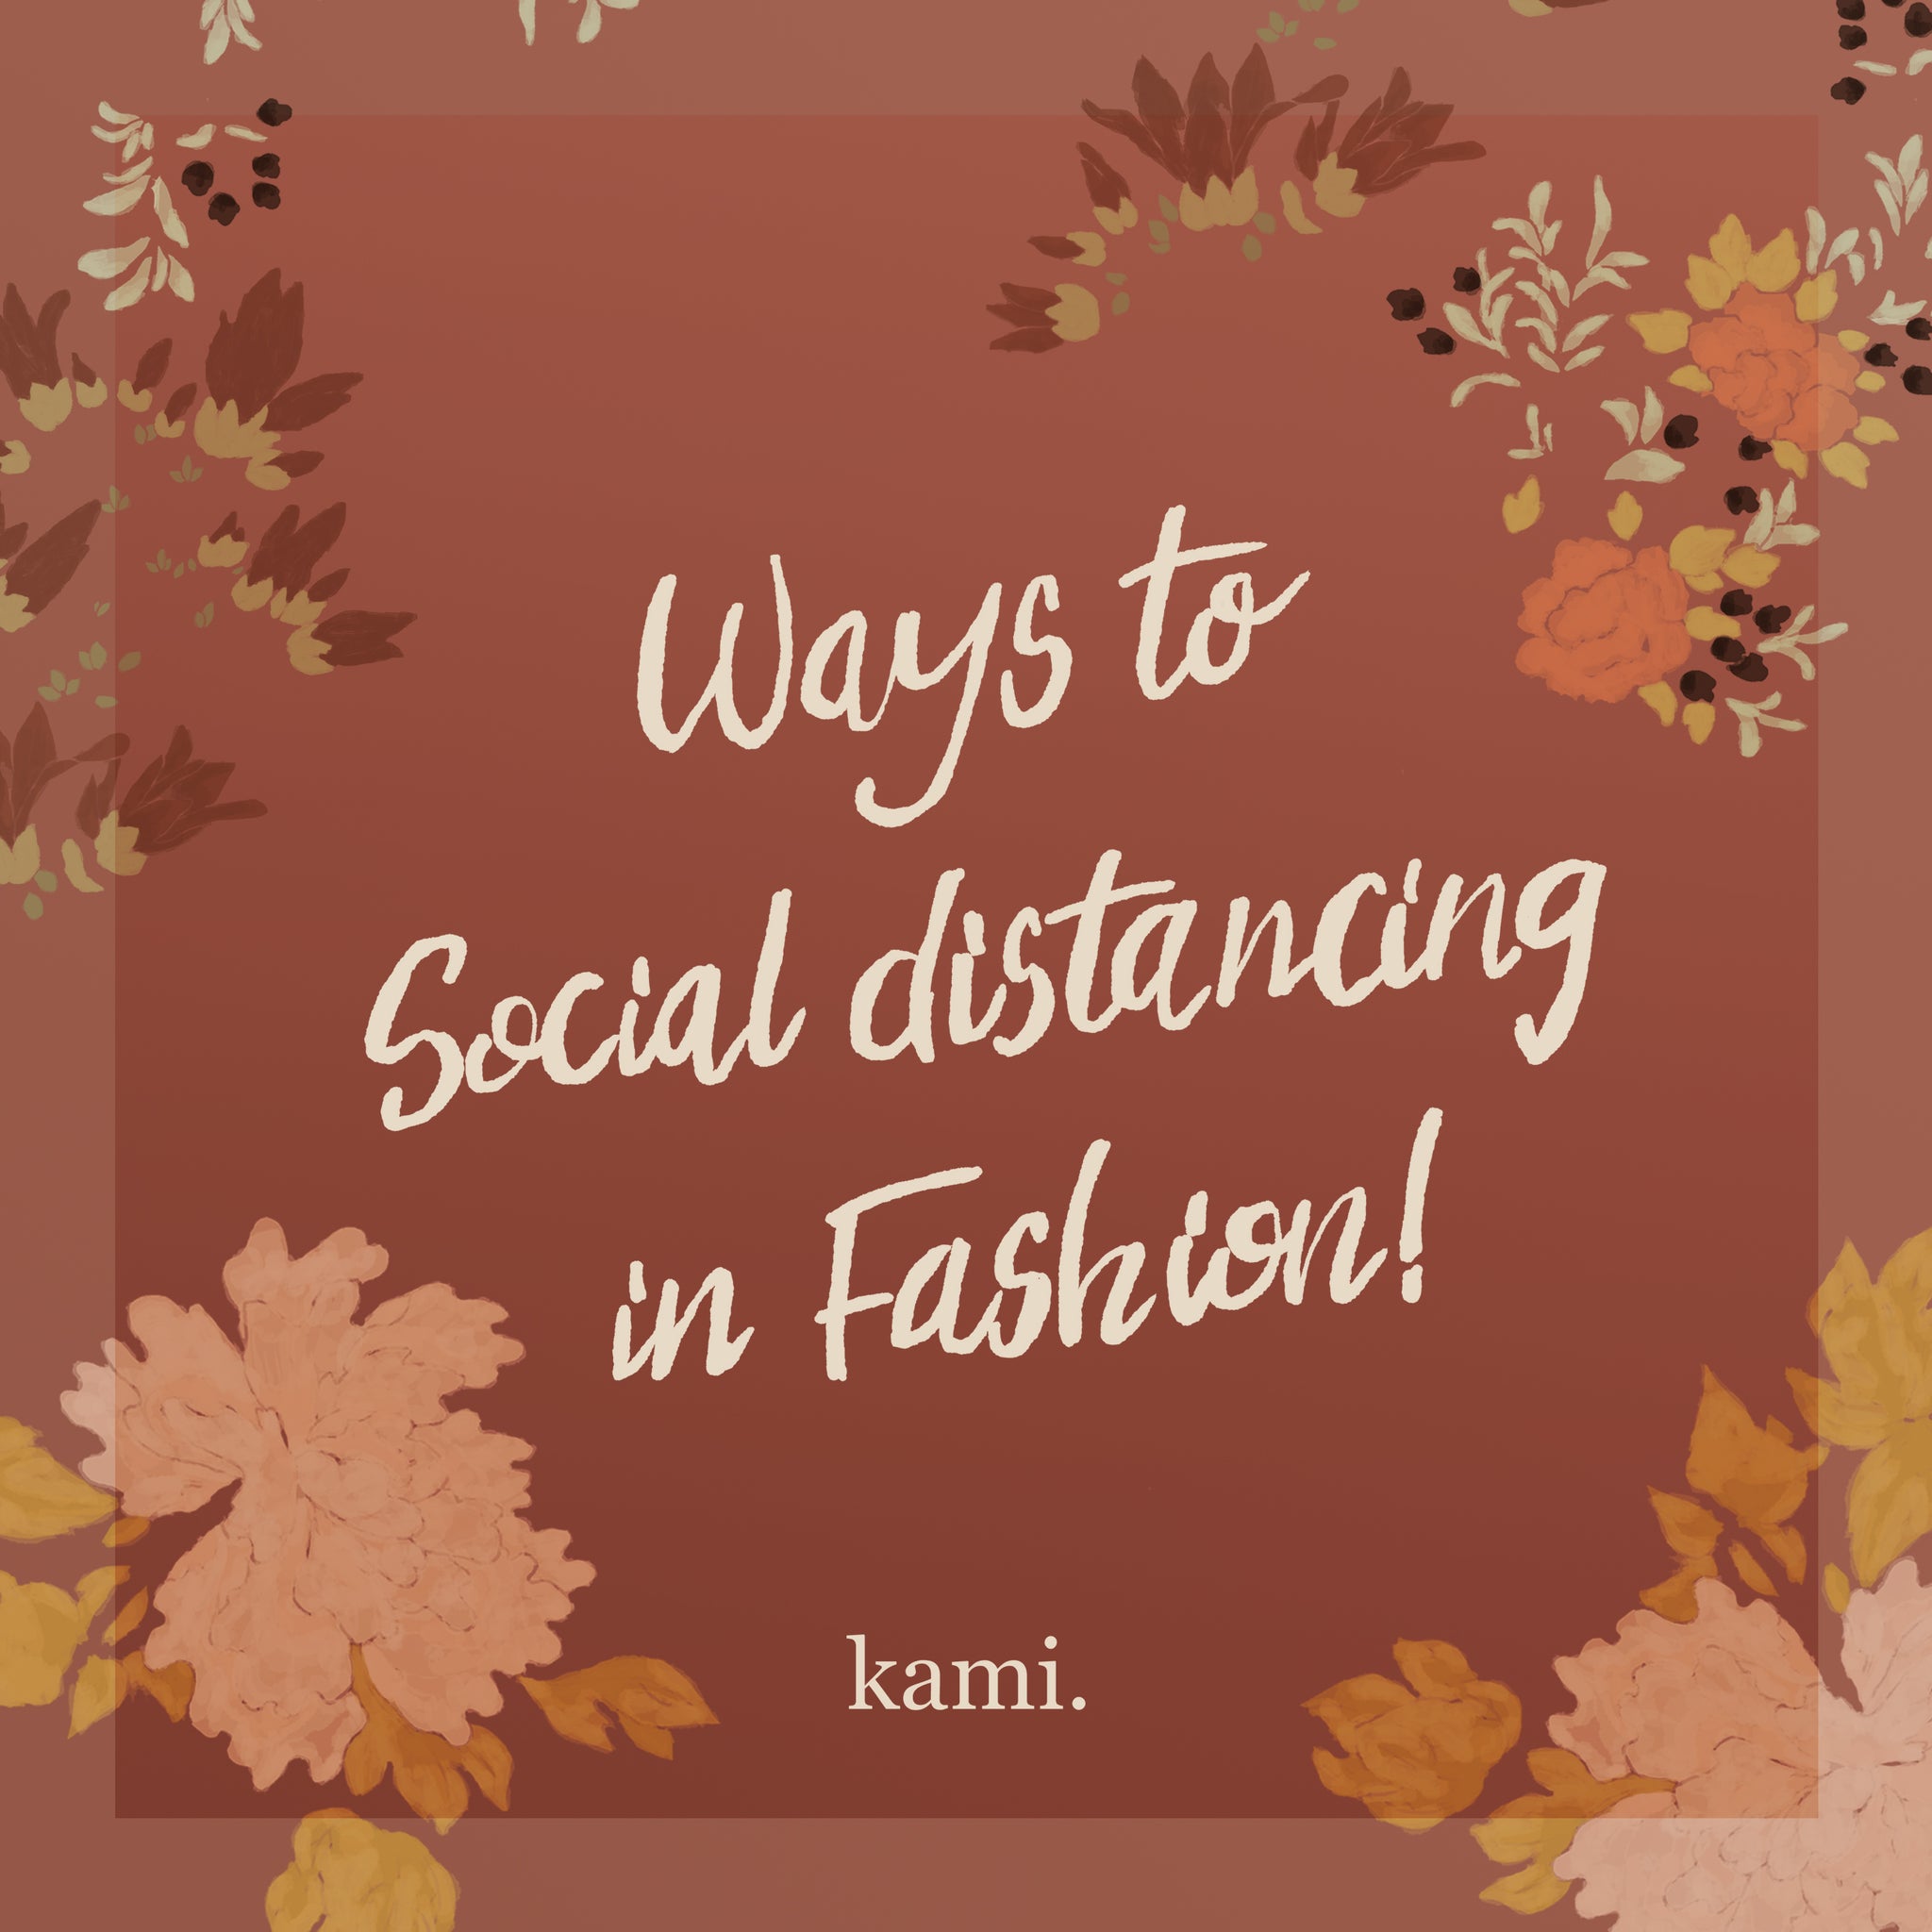 Ways To Social Distancing in Fashion!